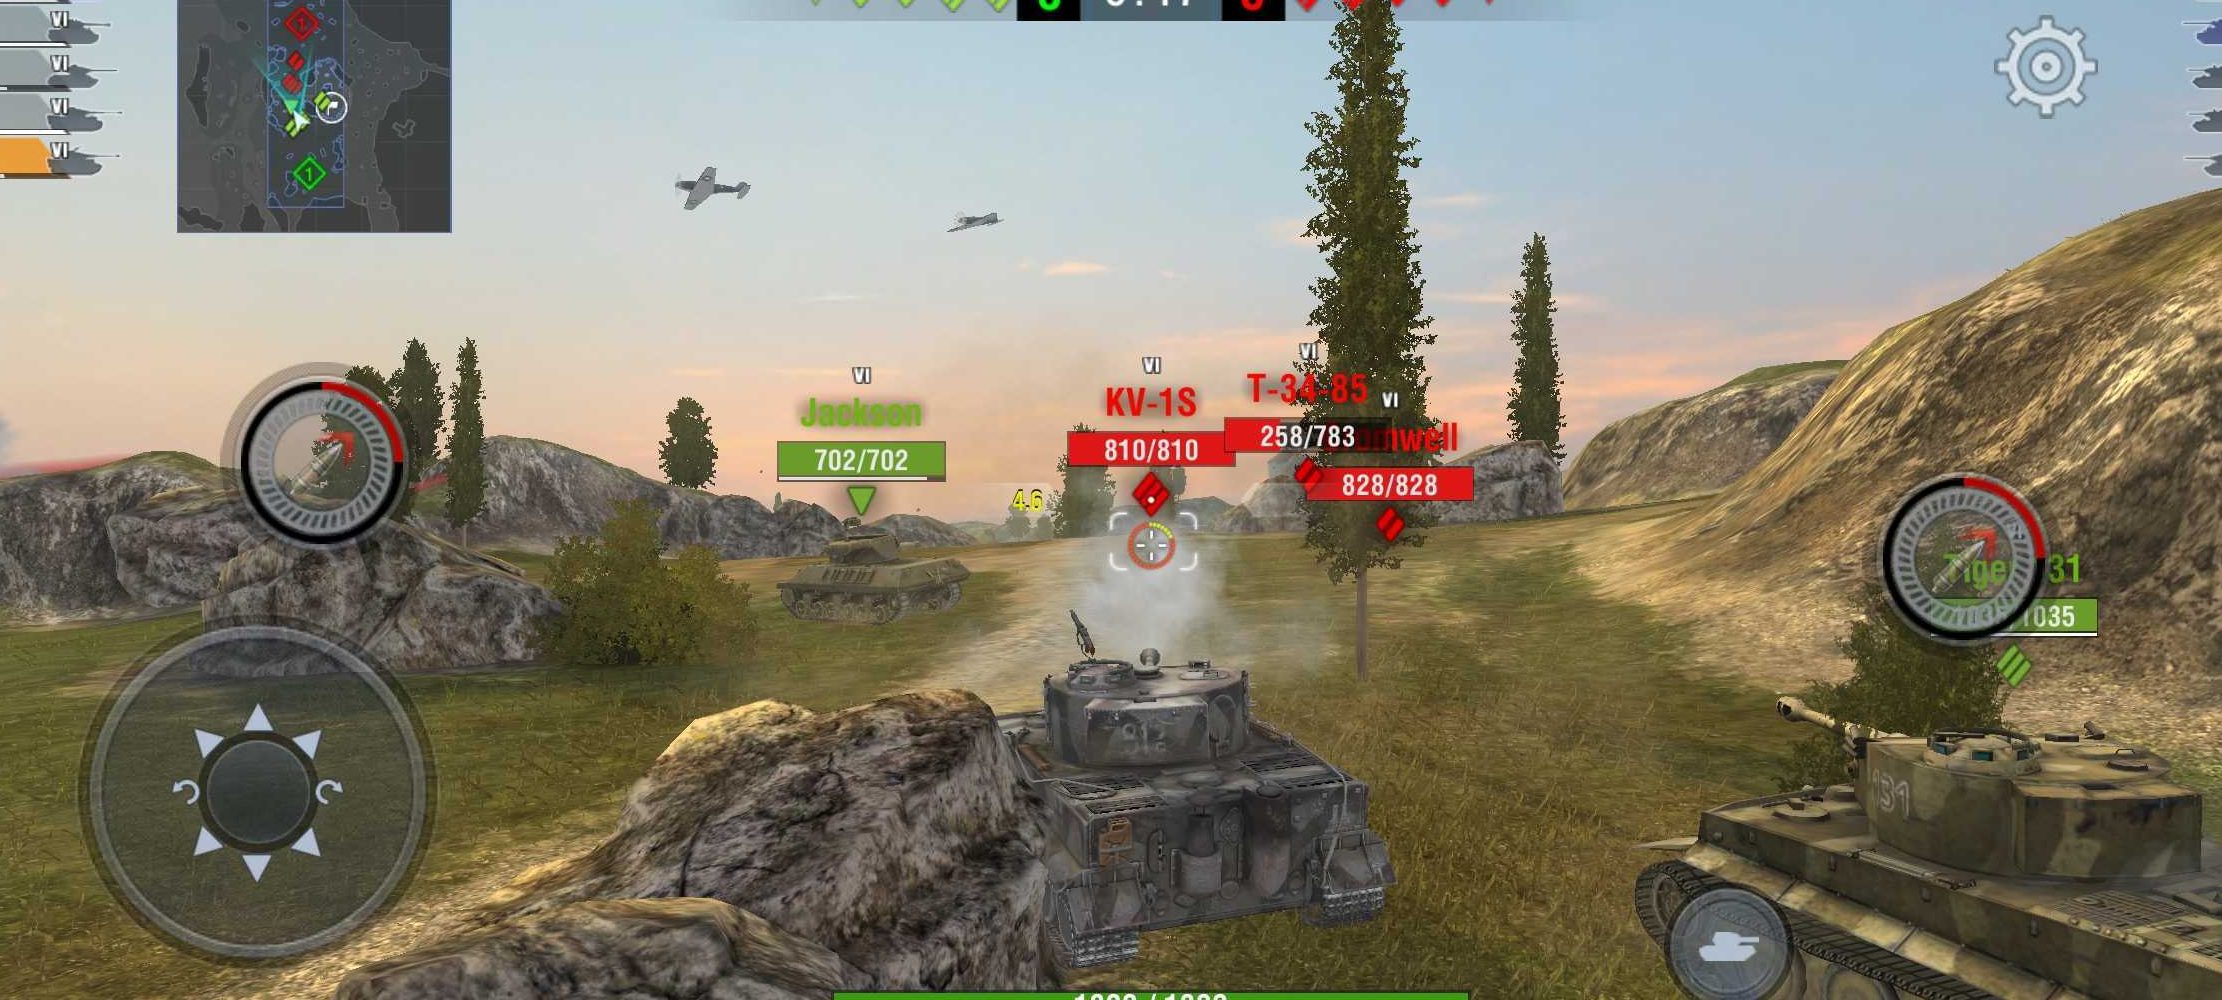 World of tanks blitz with a VPN